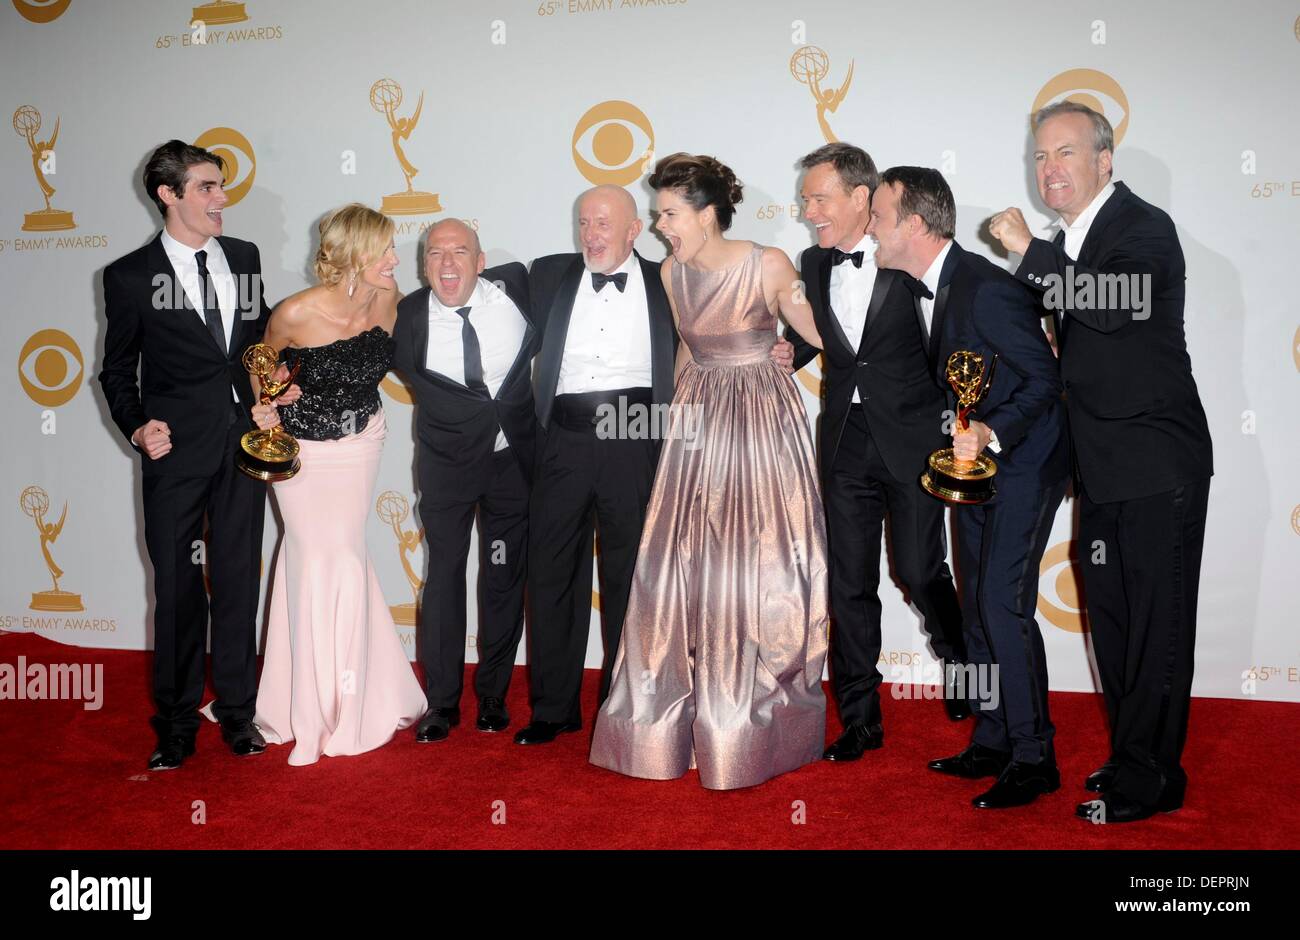 Jonathan Banks and Dean Norris on the Red Carpet at the 65th Emmys - 2 of  my faves!